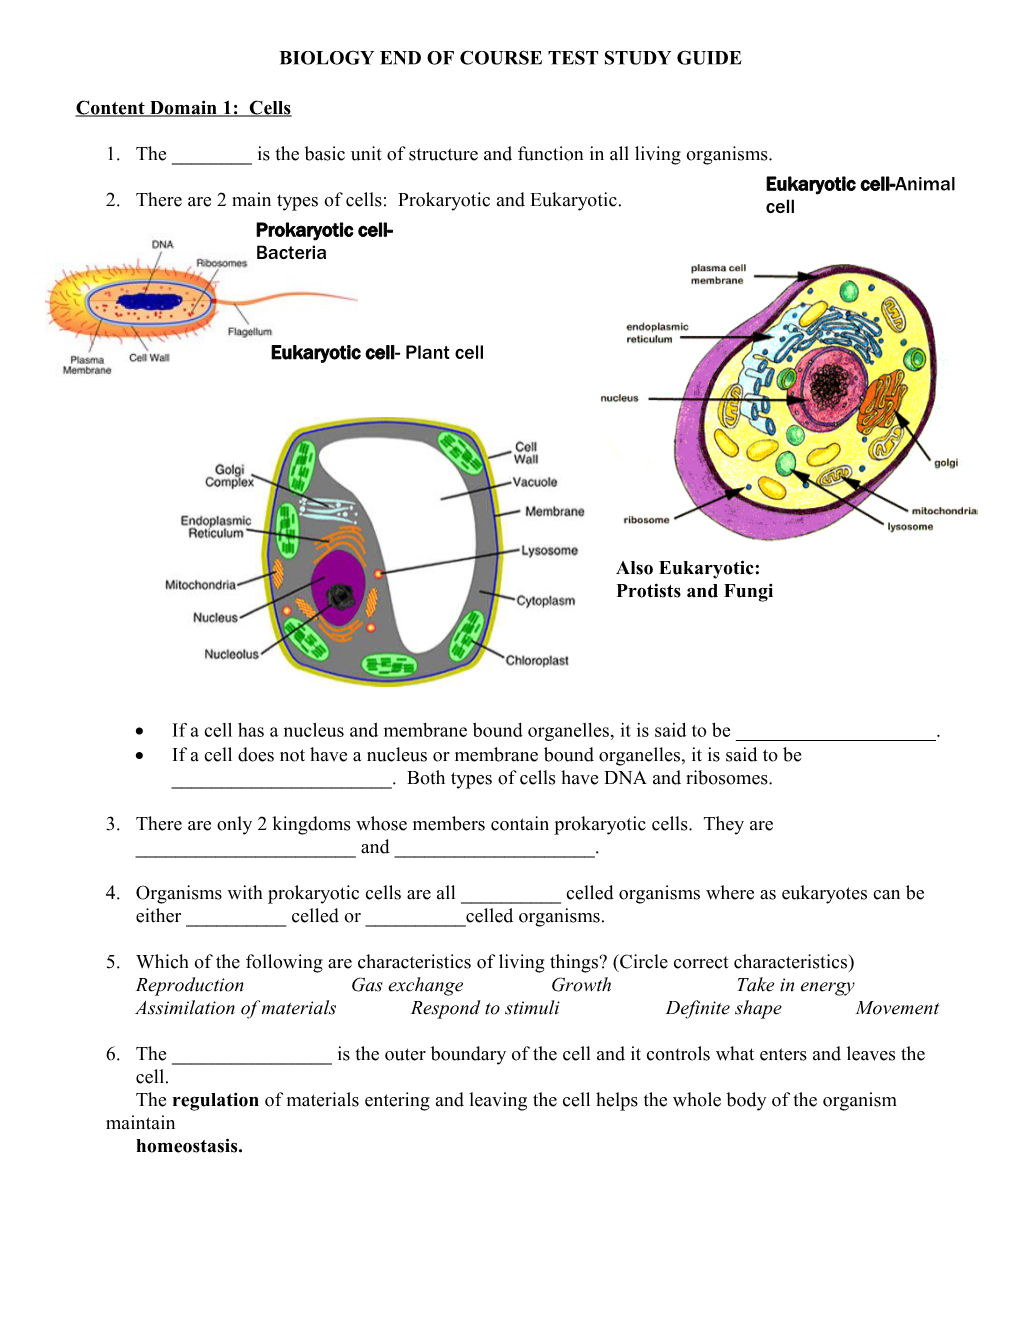 Biology End of Course Test Study Guide s1